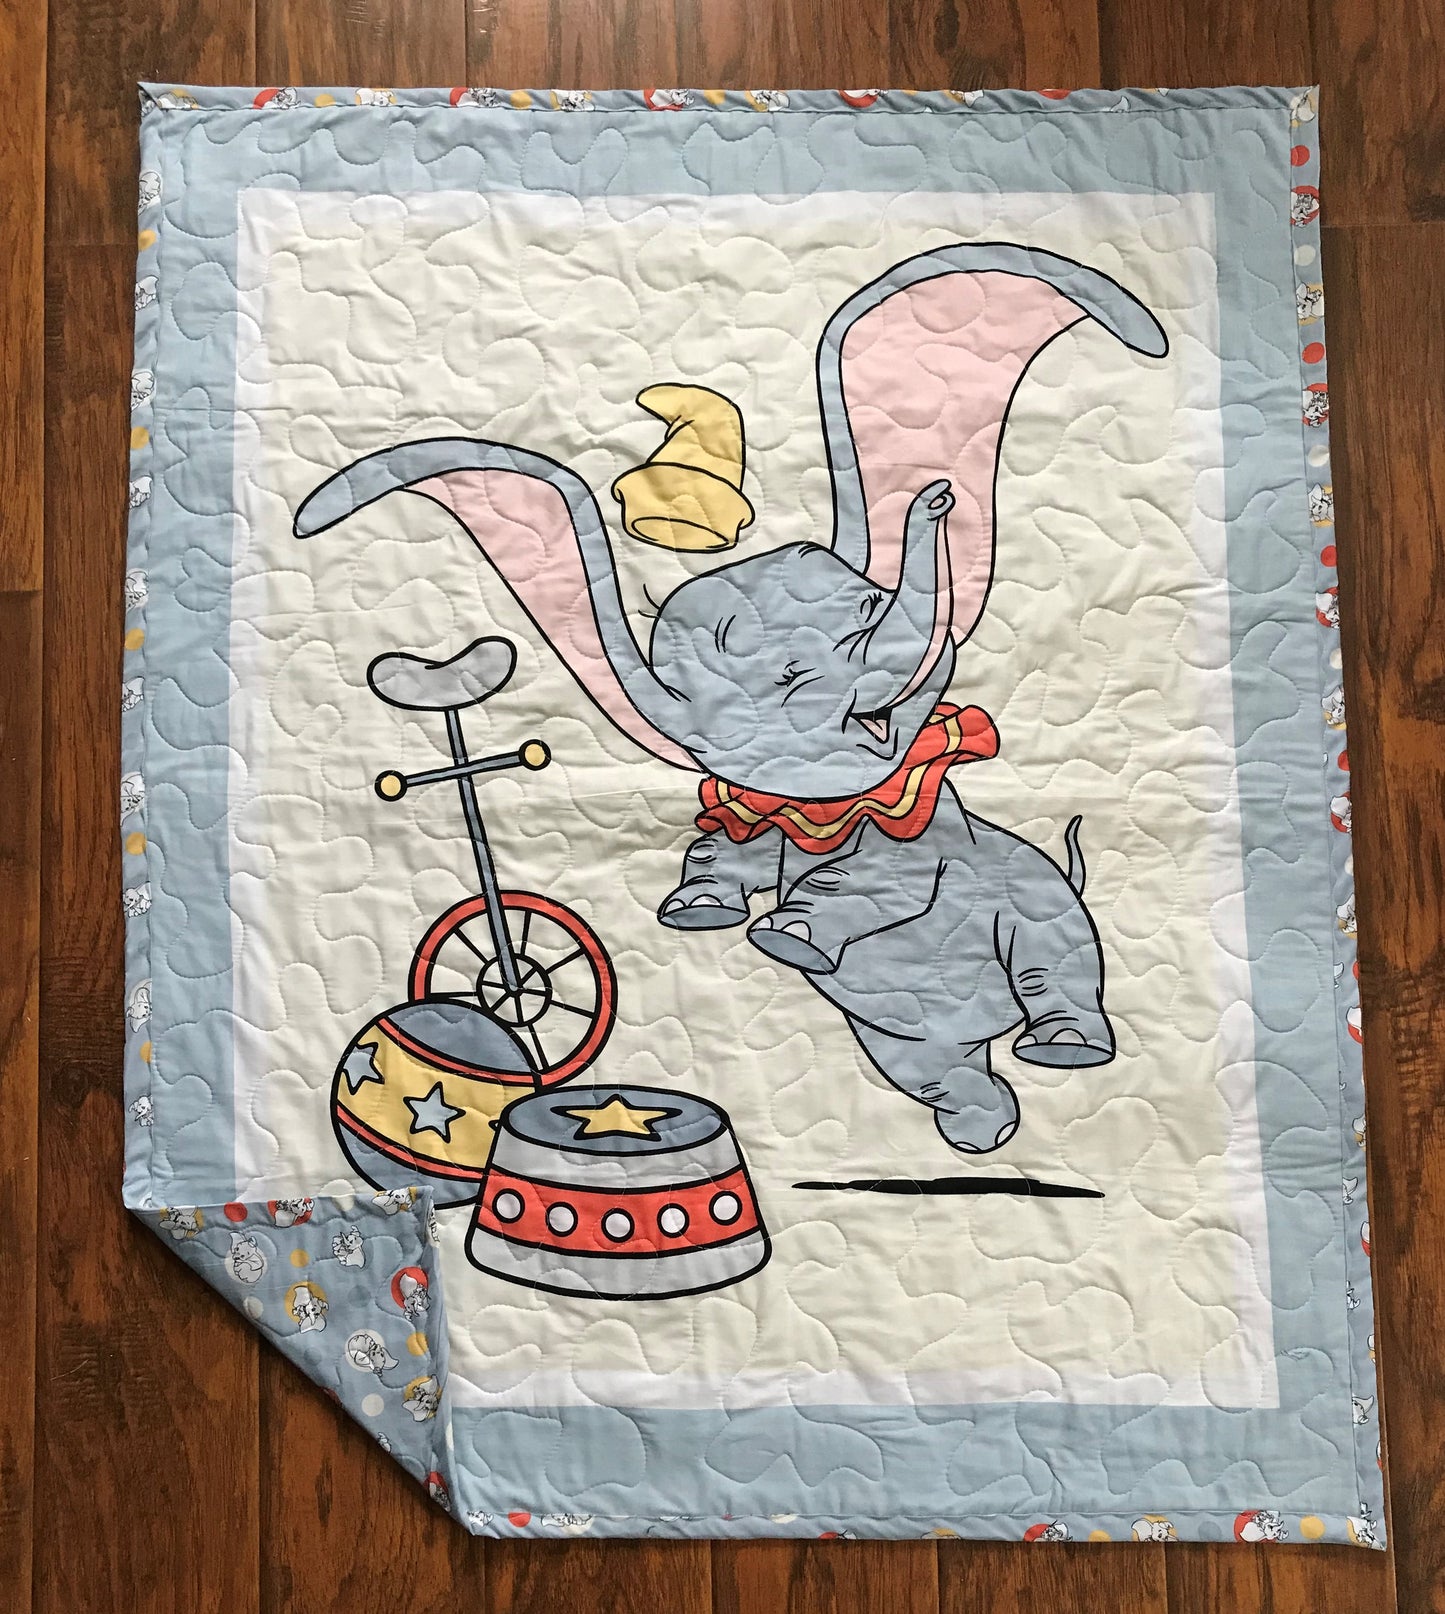 DISNEY DUMBO ELEPHANT CIRCUS Inspired Quilted Blanket